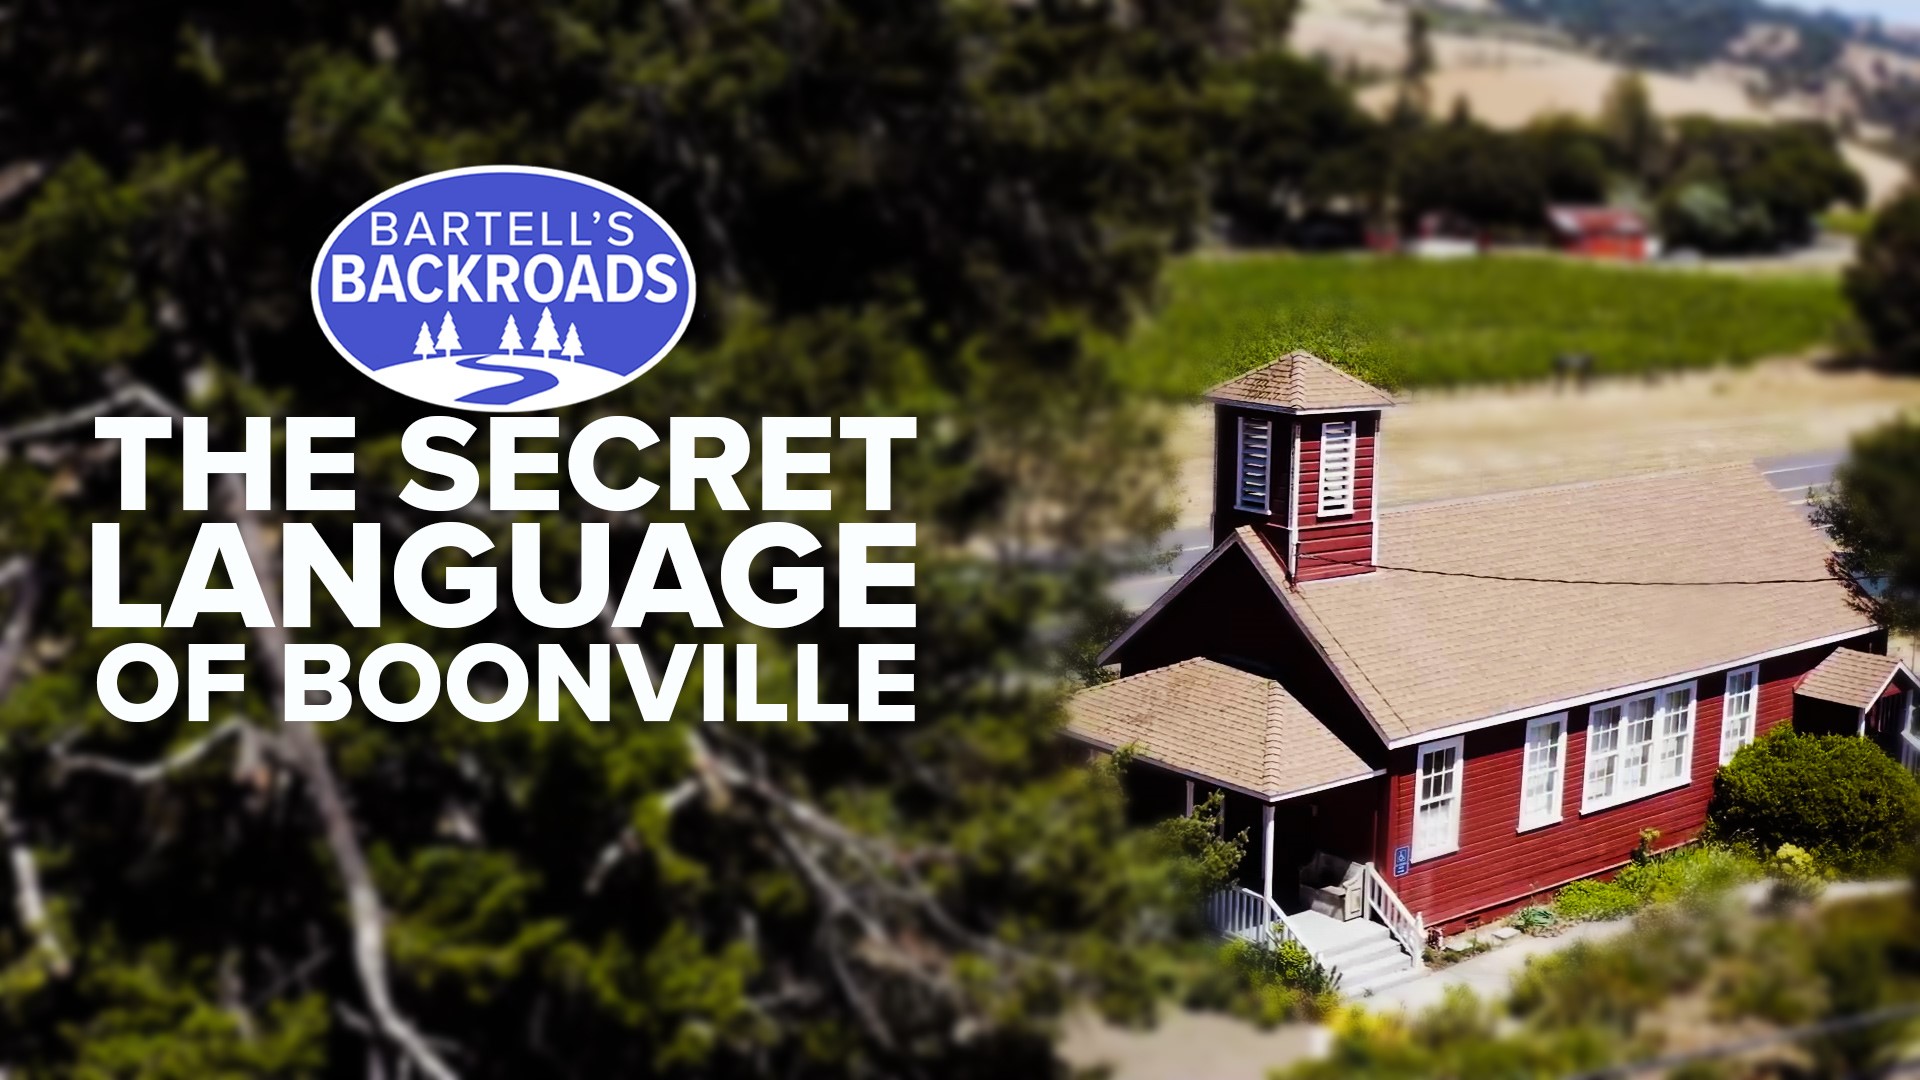 While not many people know the language anymore, the secret language of Boontling is unique to the town of Boonville.